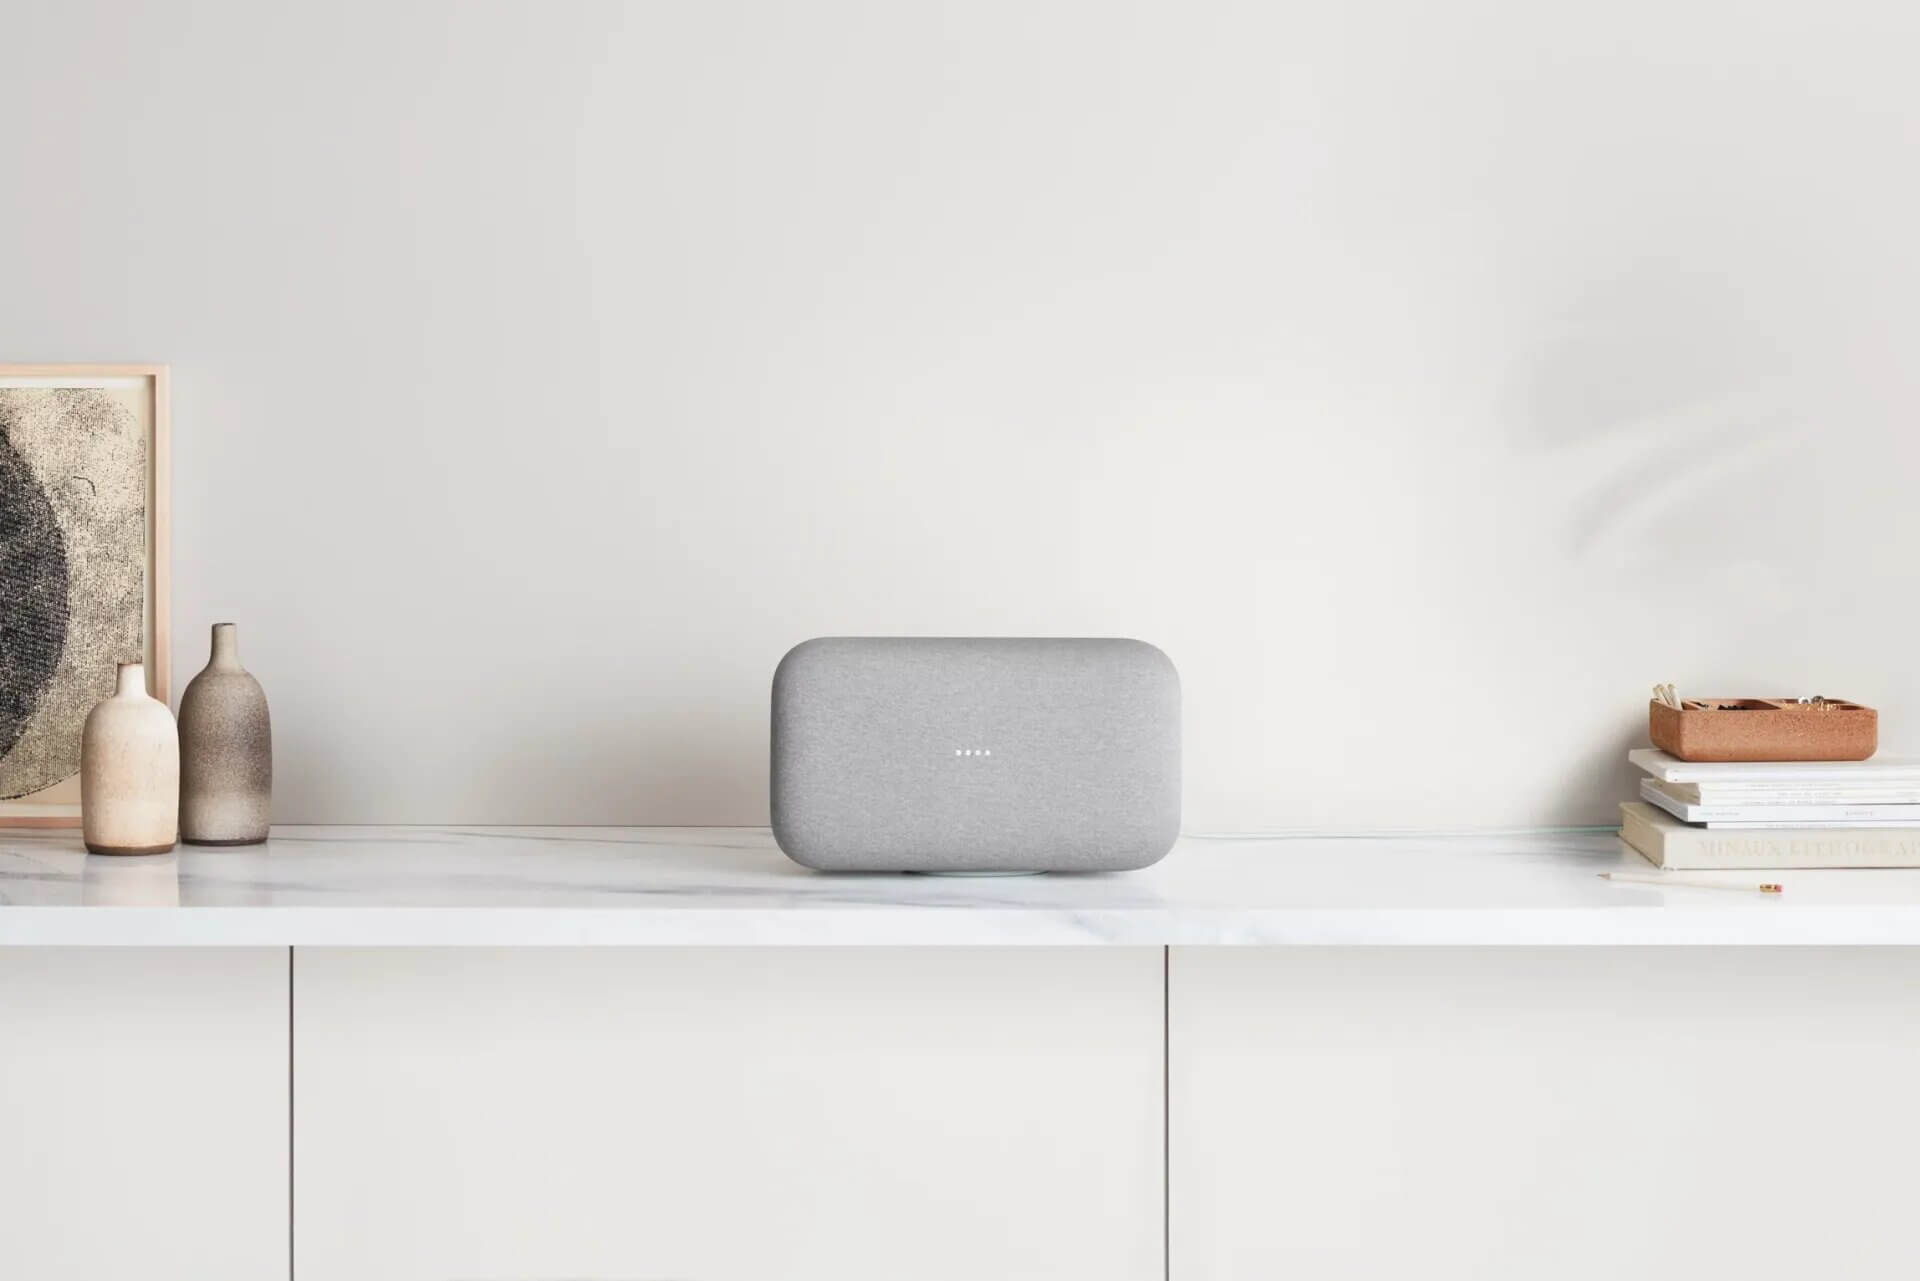 Google Home Max in White Review and Features